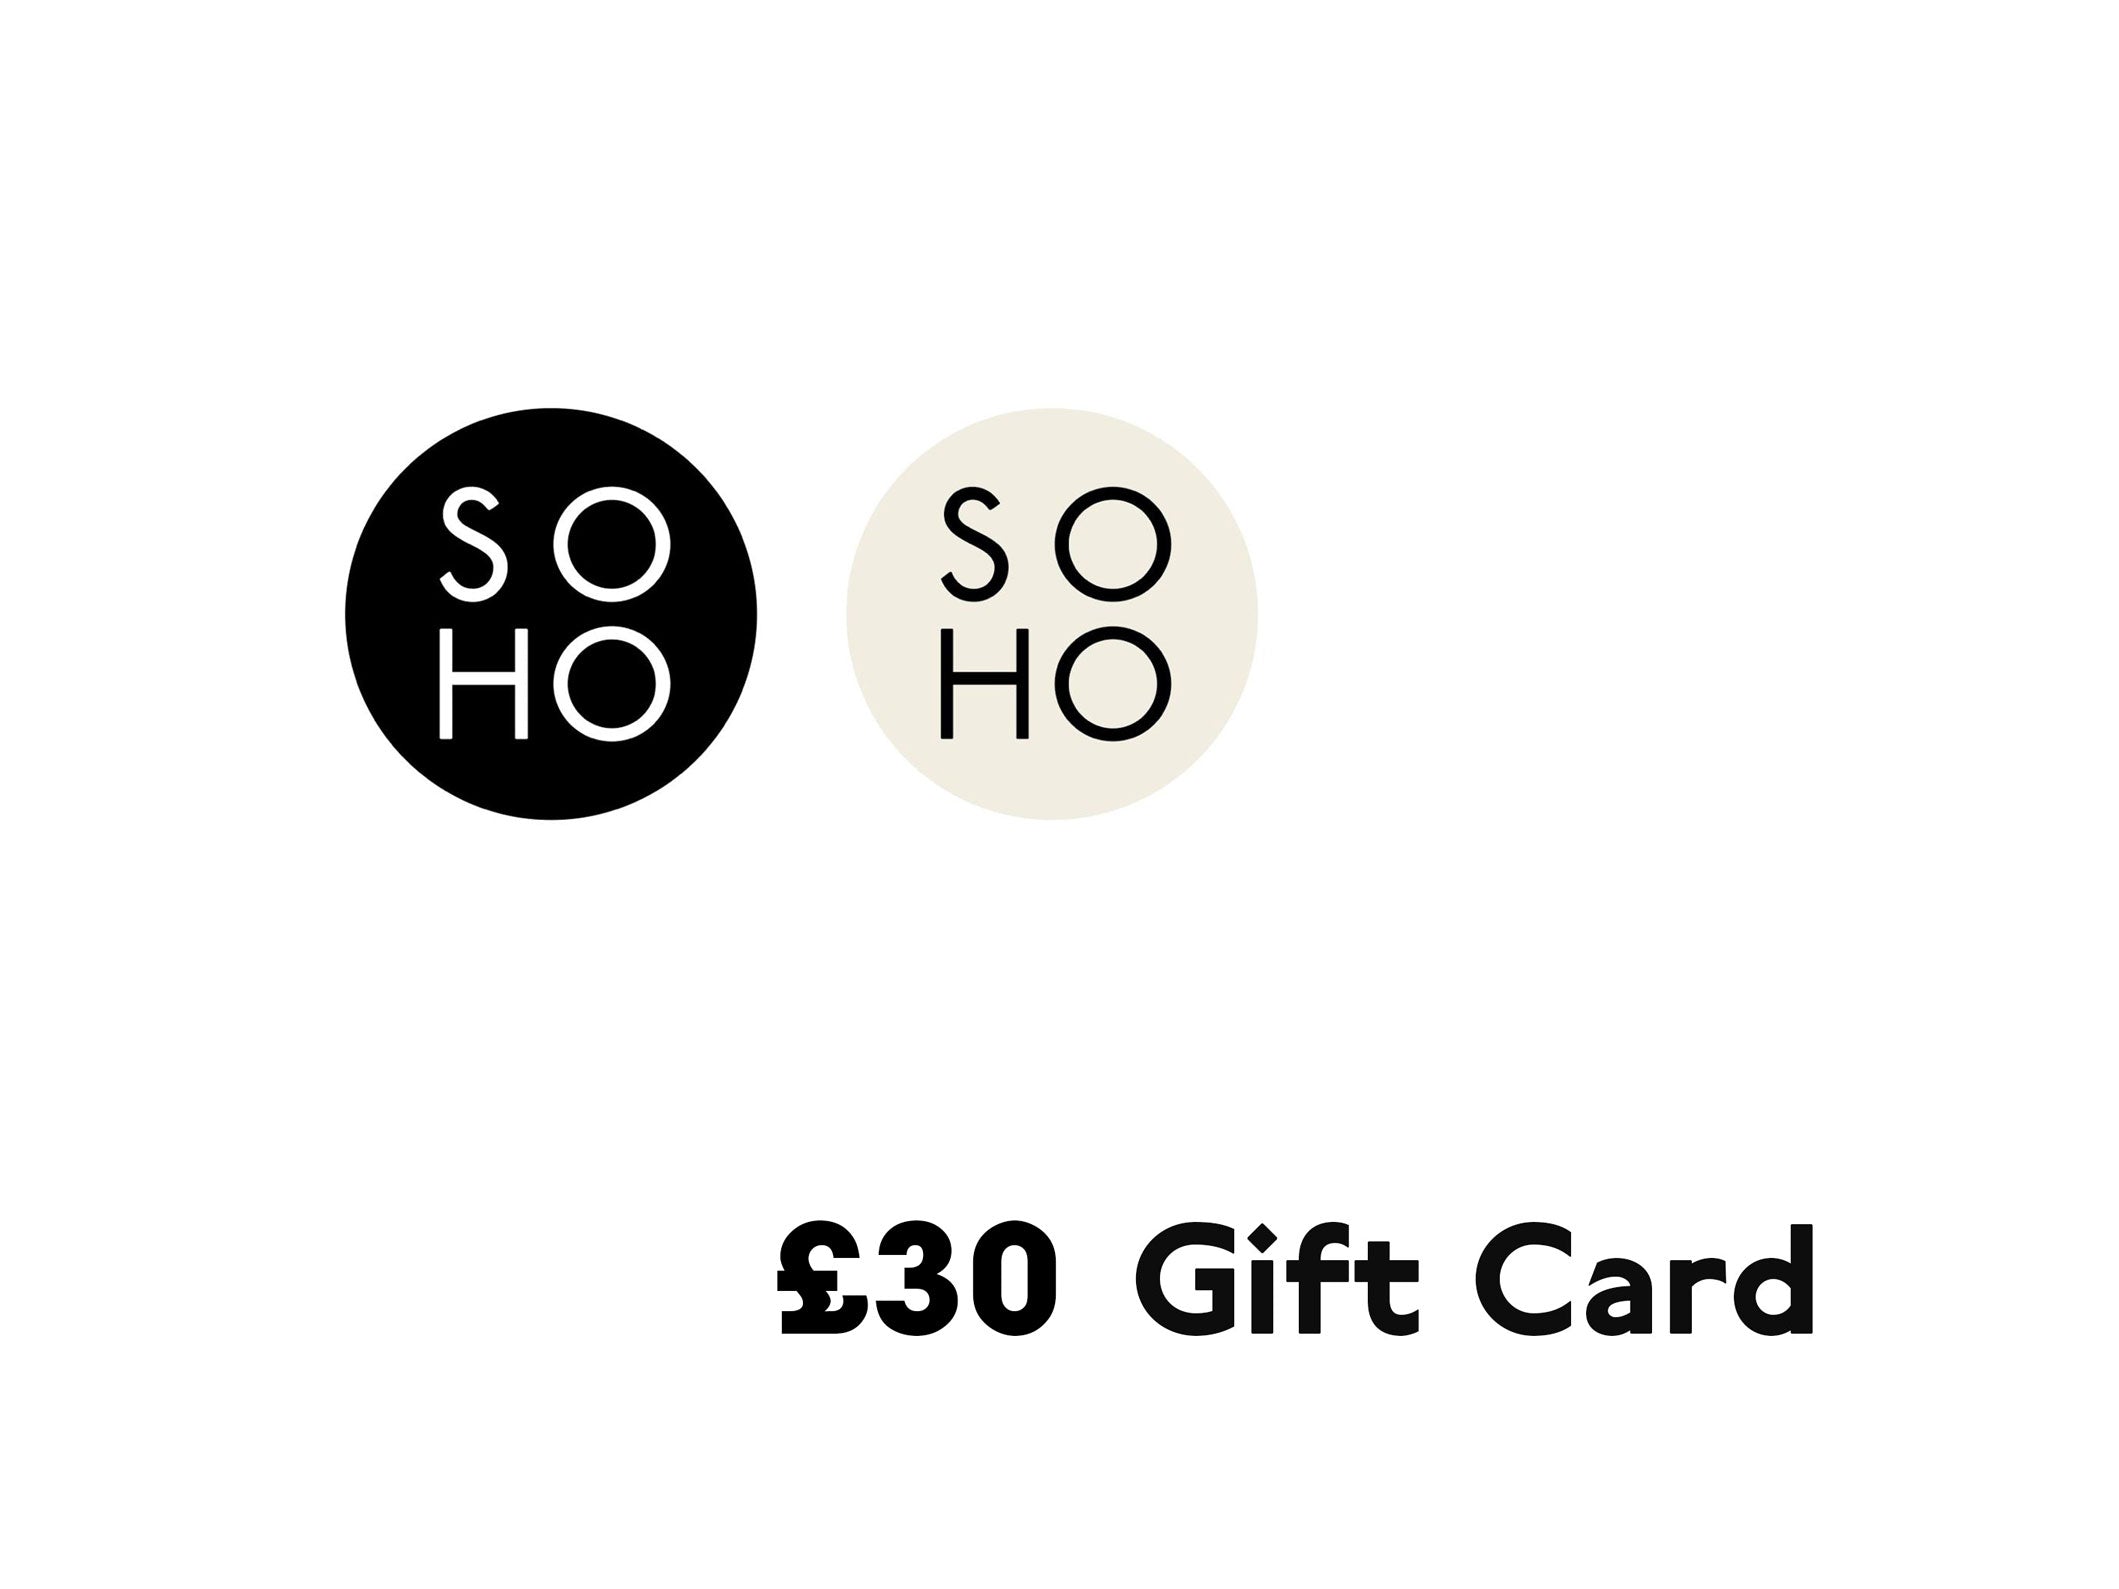 Generic graphic of SOHO Scarves gift card representing 30 GBP